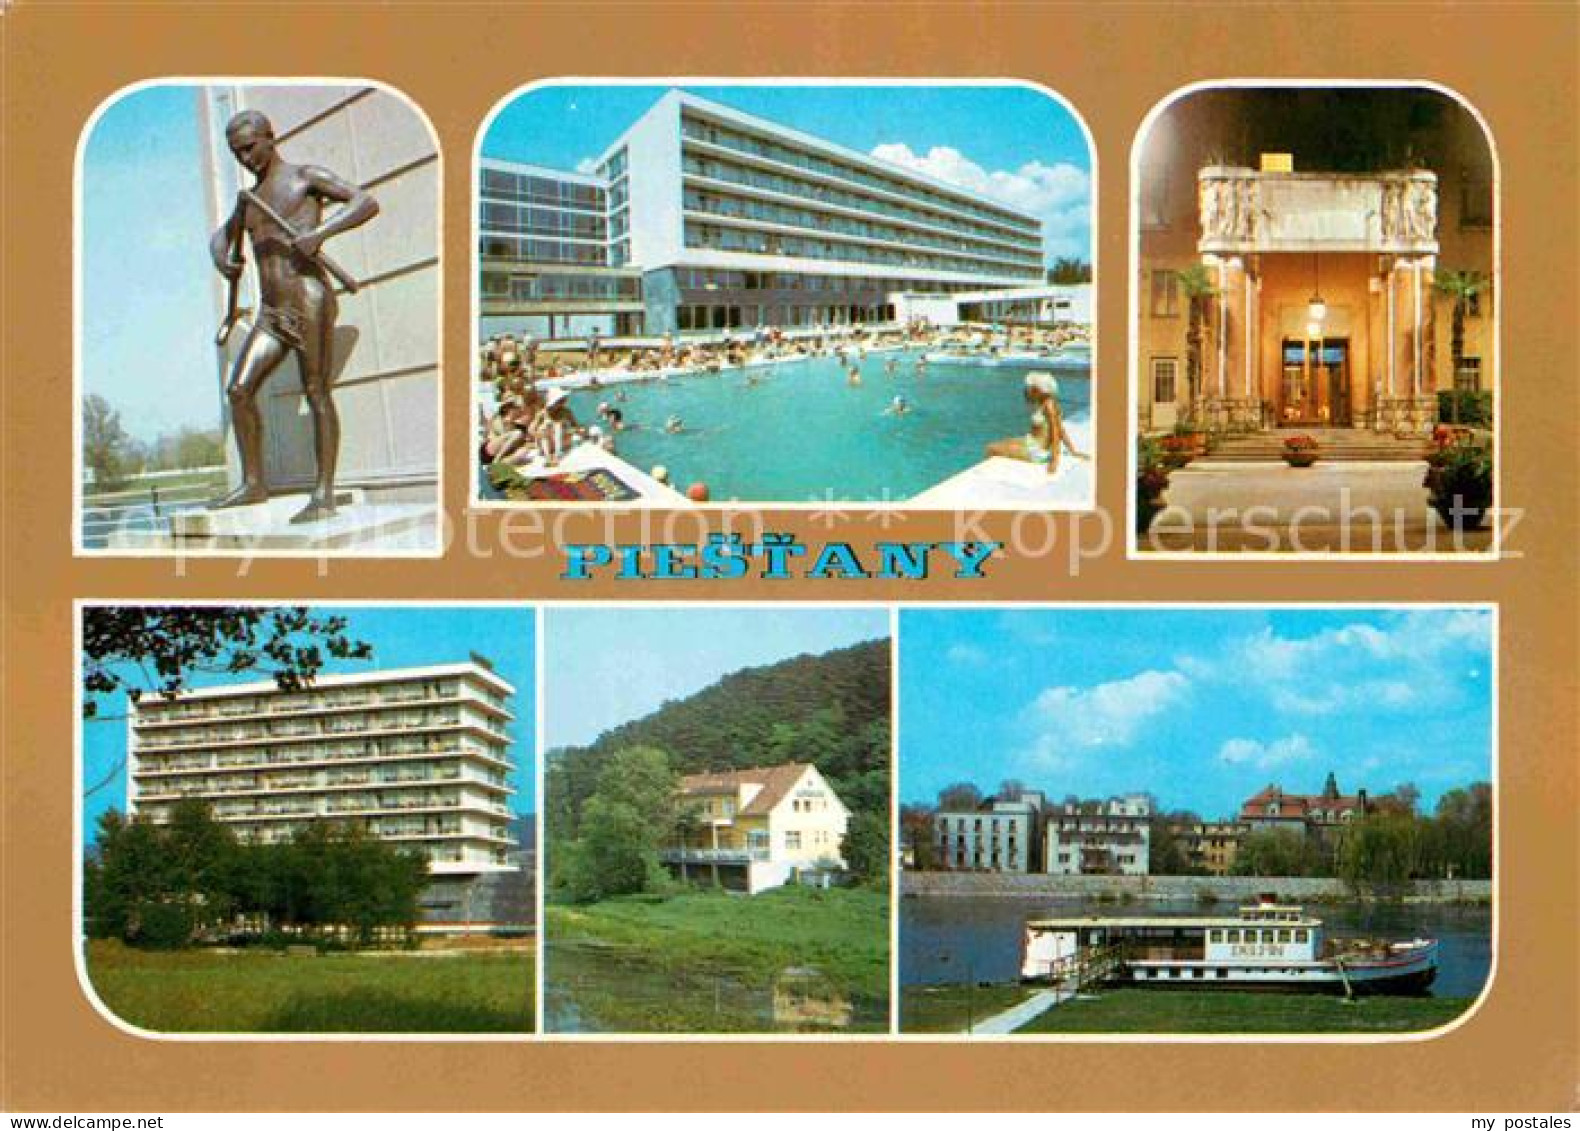 72875406 Piestany Statue Thermalbad Freibad Hotel Bootsanleger Banska Bystrica - Slovaquie